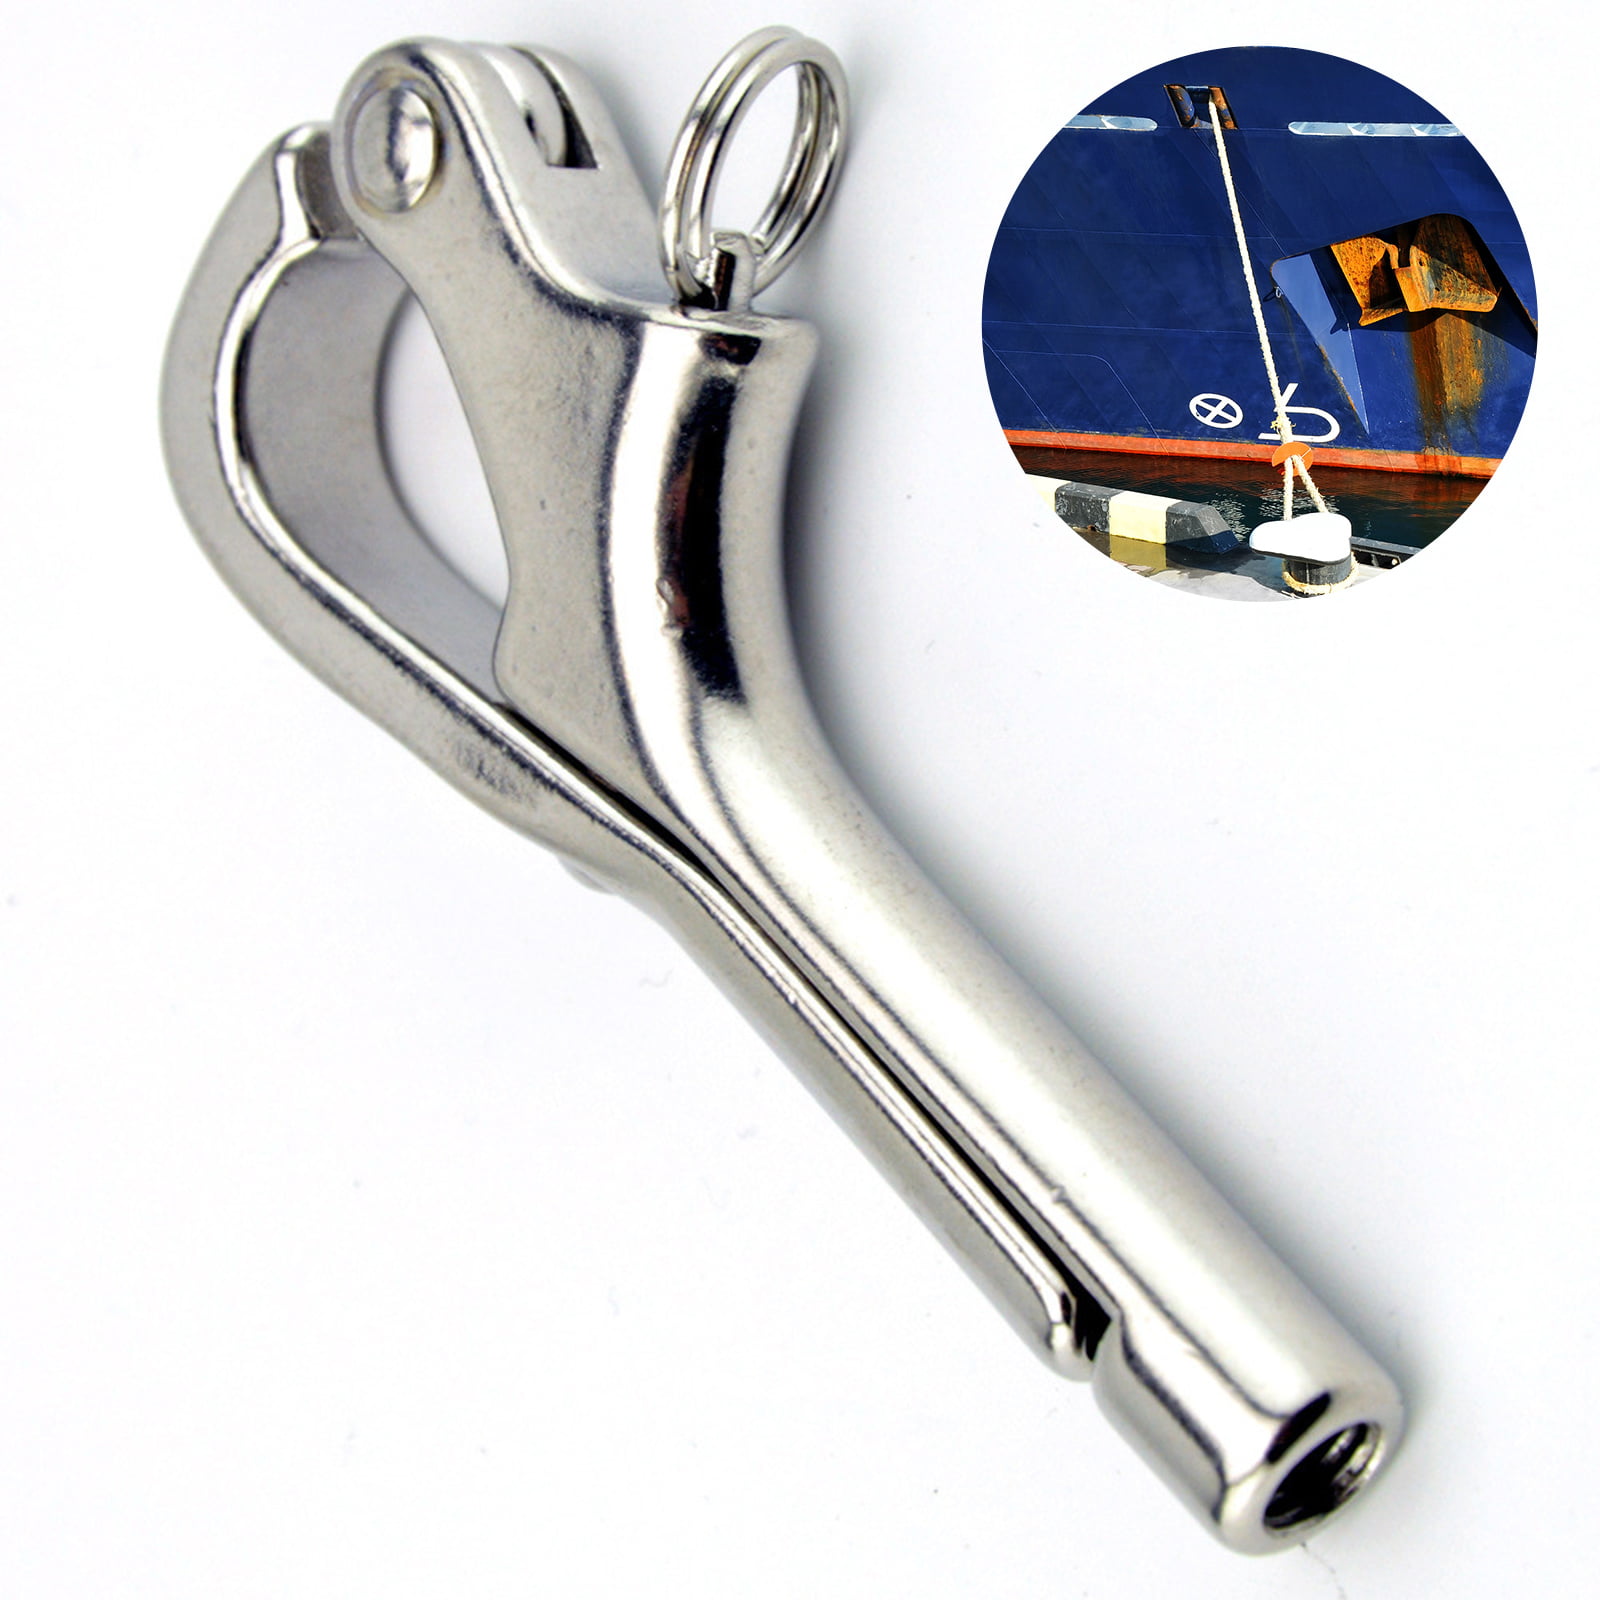 2X 4" Pelican Hook with Quick Release Slip Link Shackle for Boat Guard Rail 